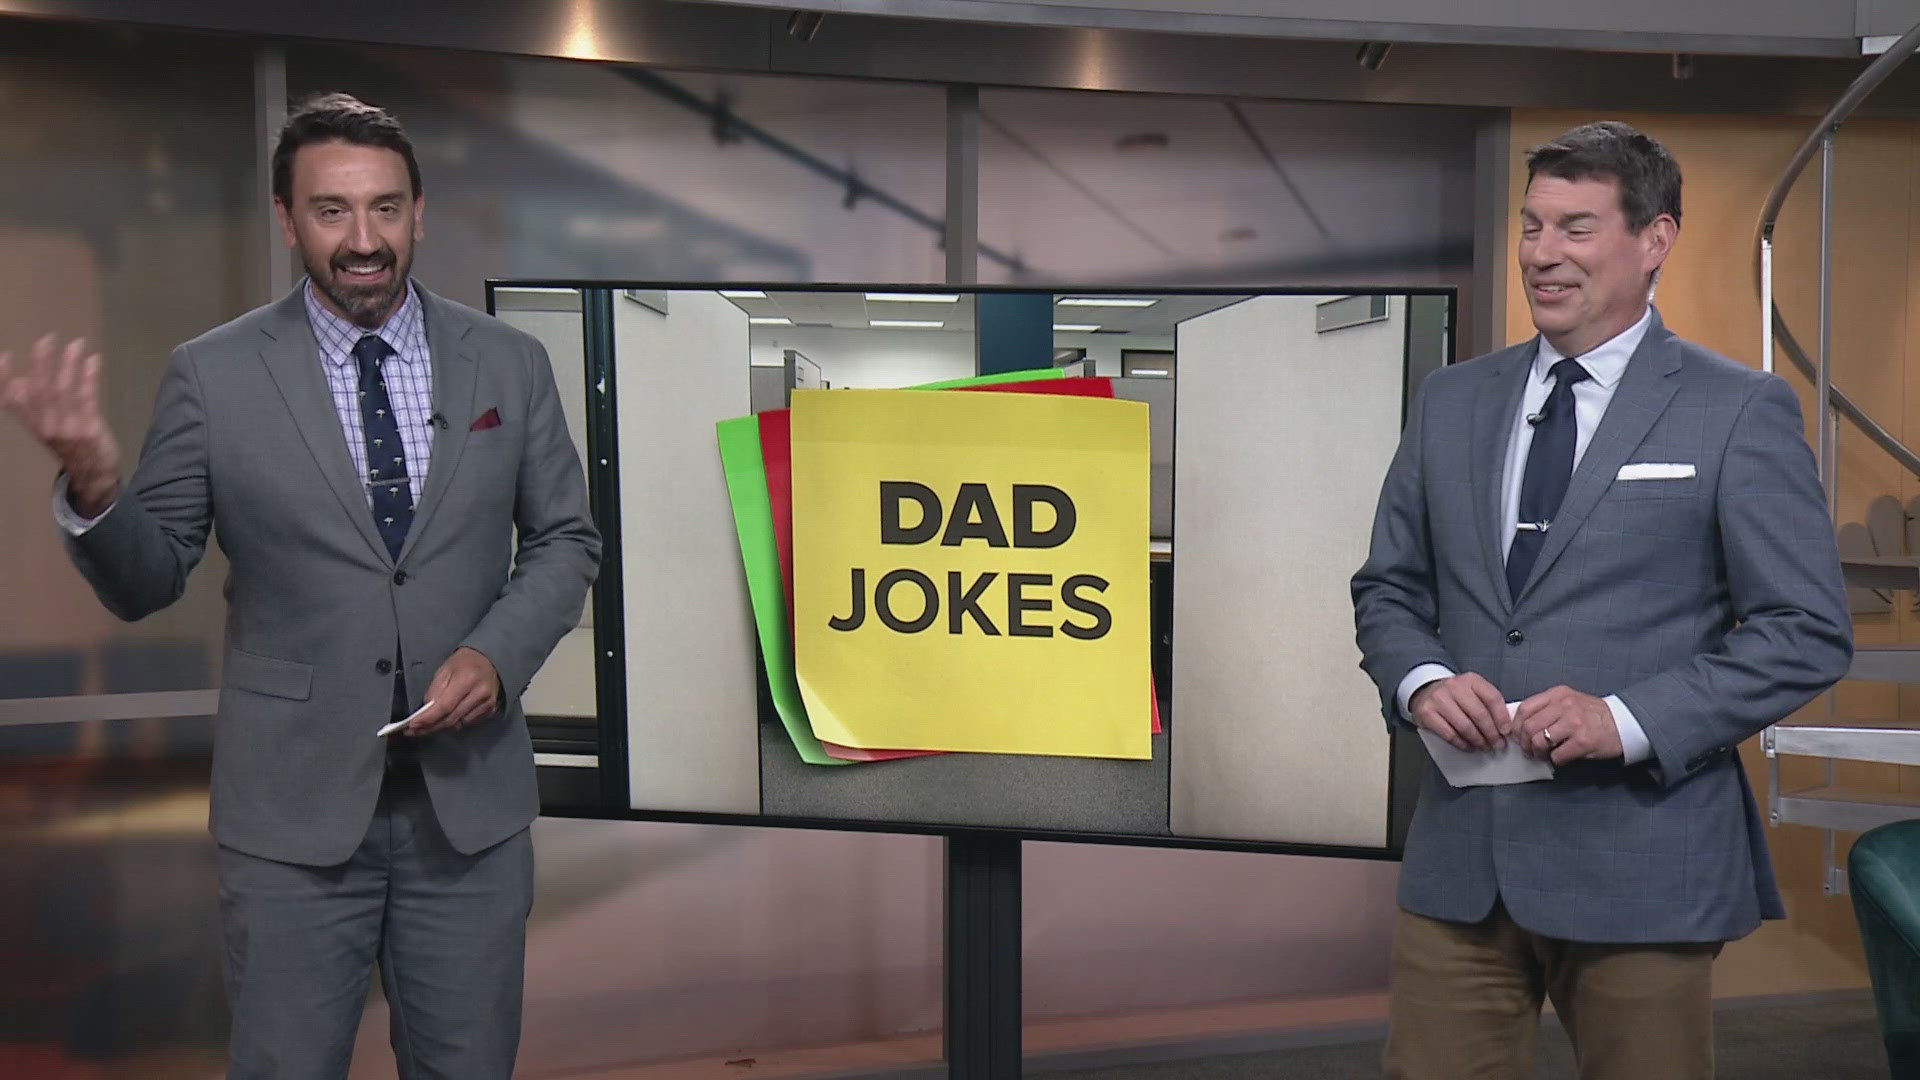 Need a laugh? Here are some dad jokes from 3News' Matt Wintz and Dave Chudowsky.